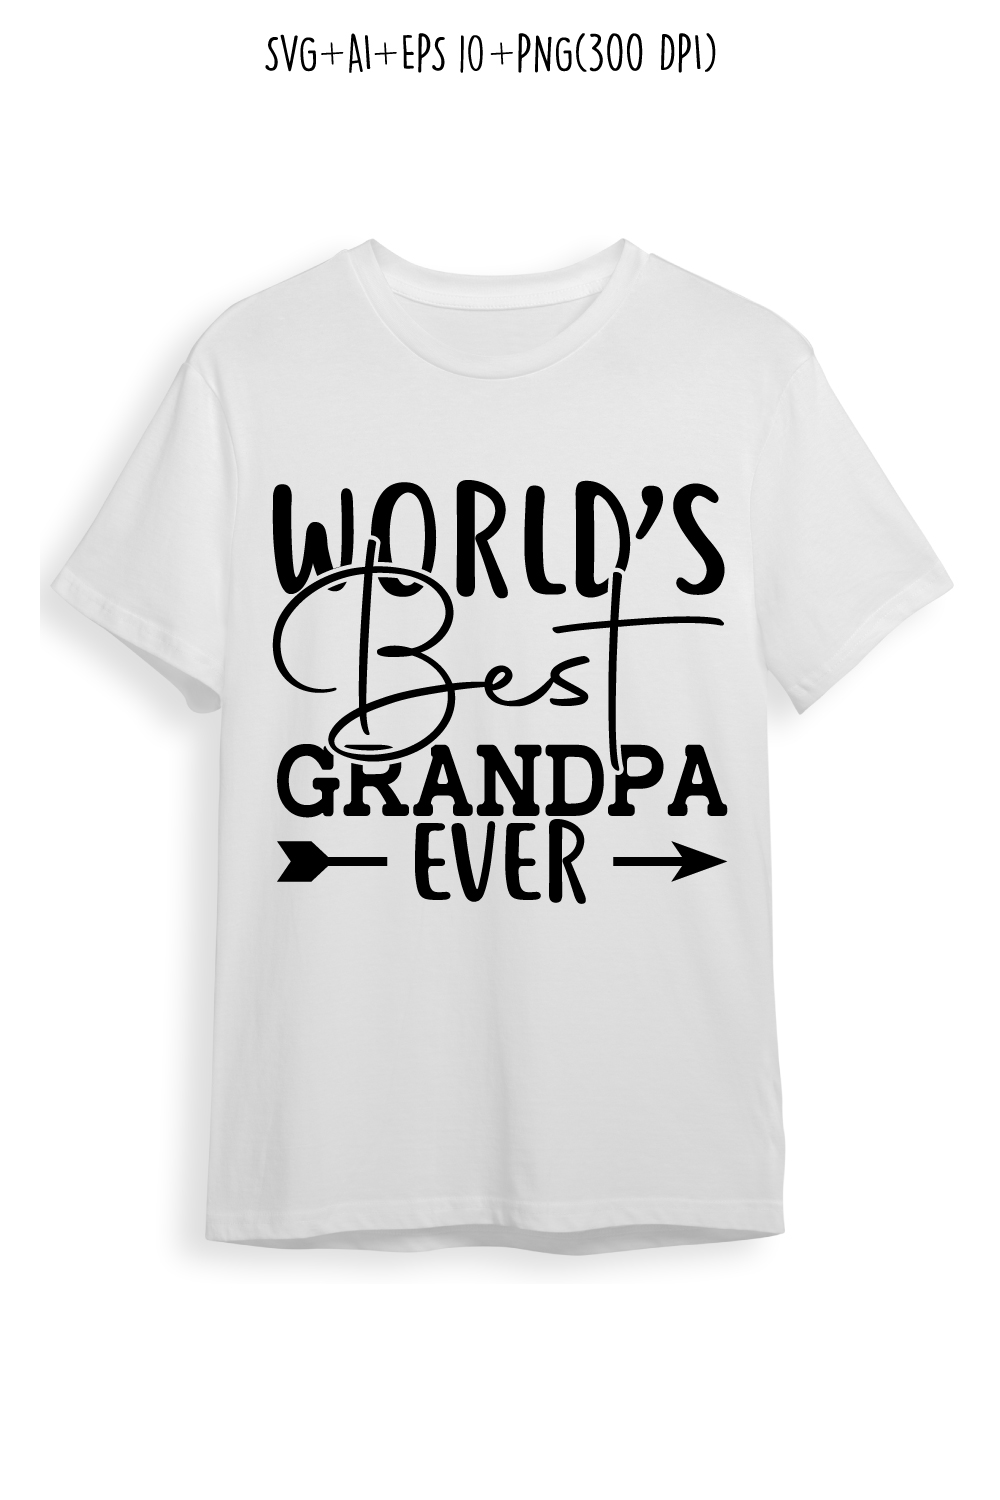 world’s best grandpa ever SVG design for t-shirts, cards, frame artwork, phone cases, bags, mugs, stickers, tumblers, print, etc pinterest preview image.